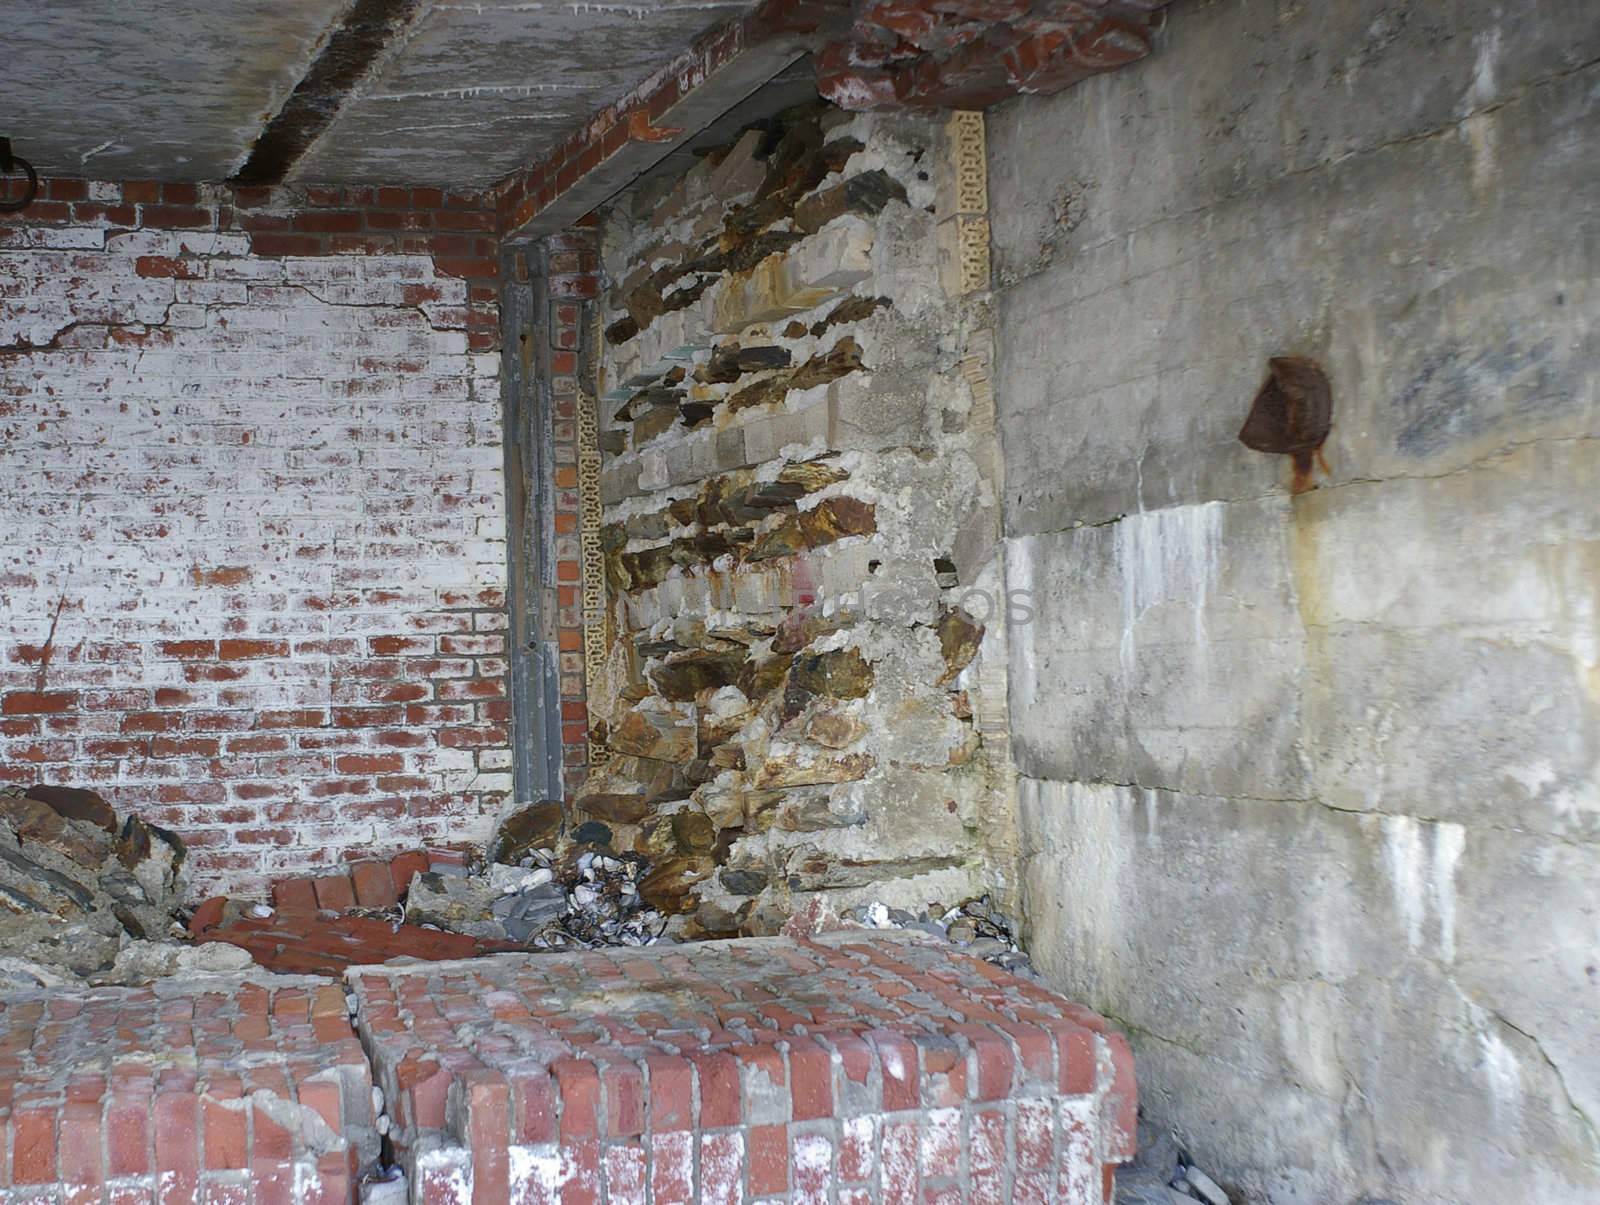 The inside walls of a building that are crumbling with age due abandment.